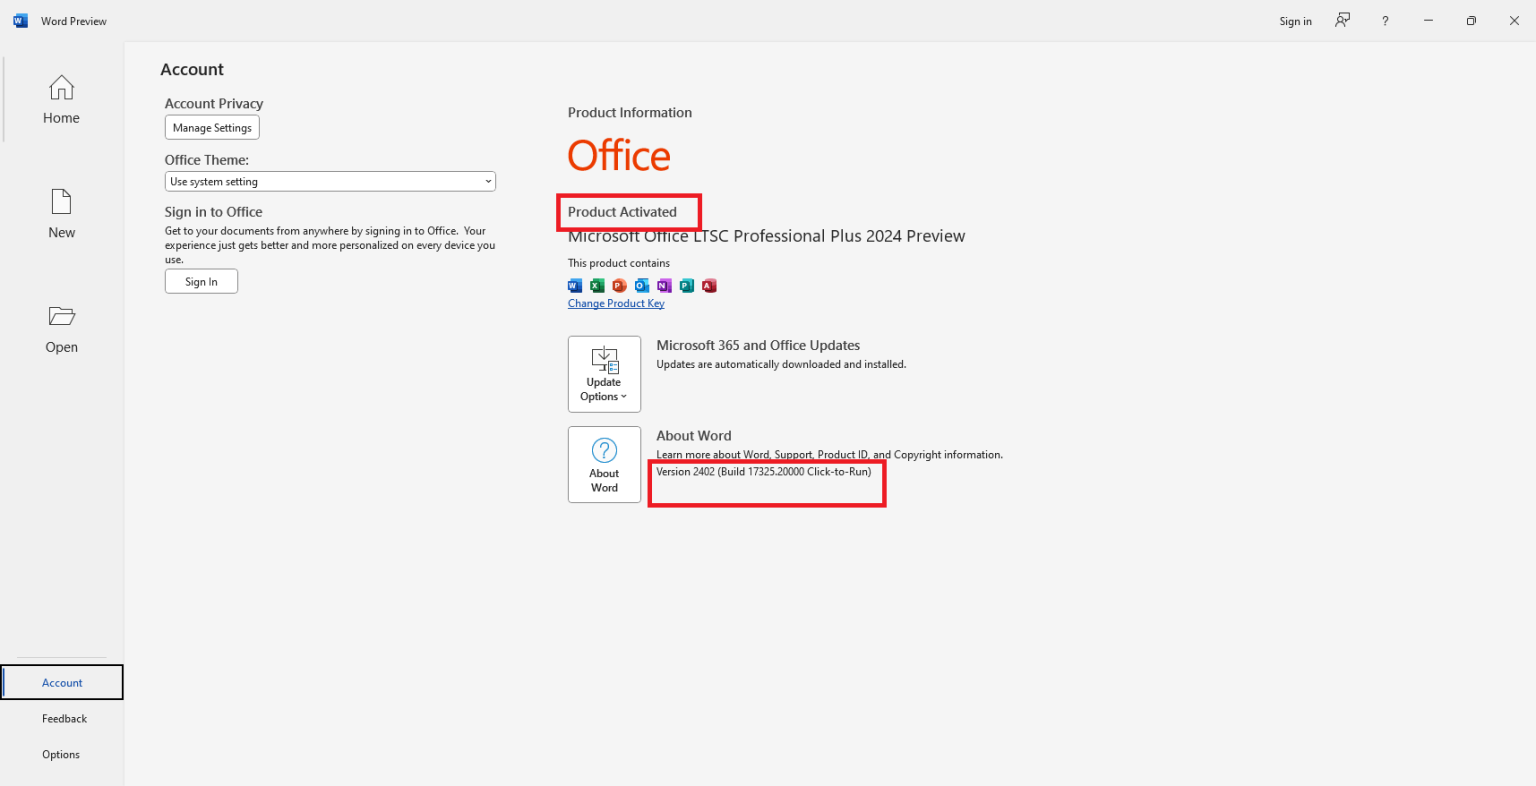 Download Microsoft Office 2024 Version 2402 Build 17325.20000 Preview